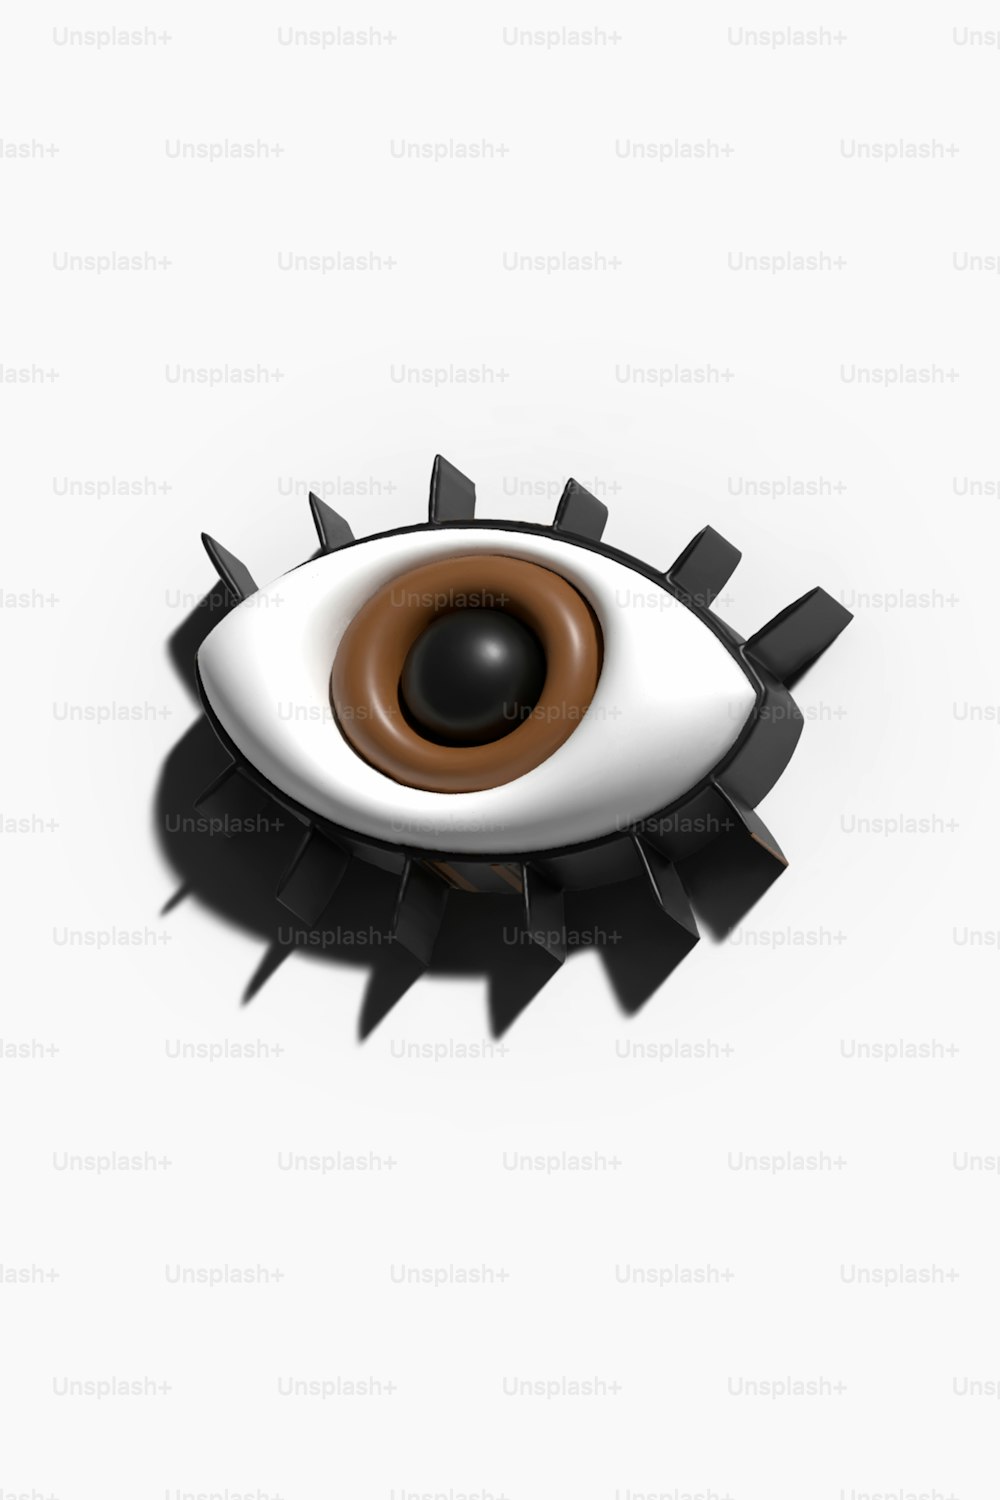 a close up of an eye with spikes on it